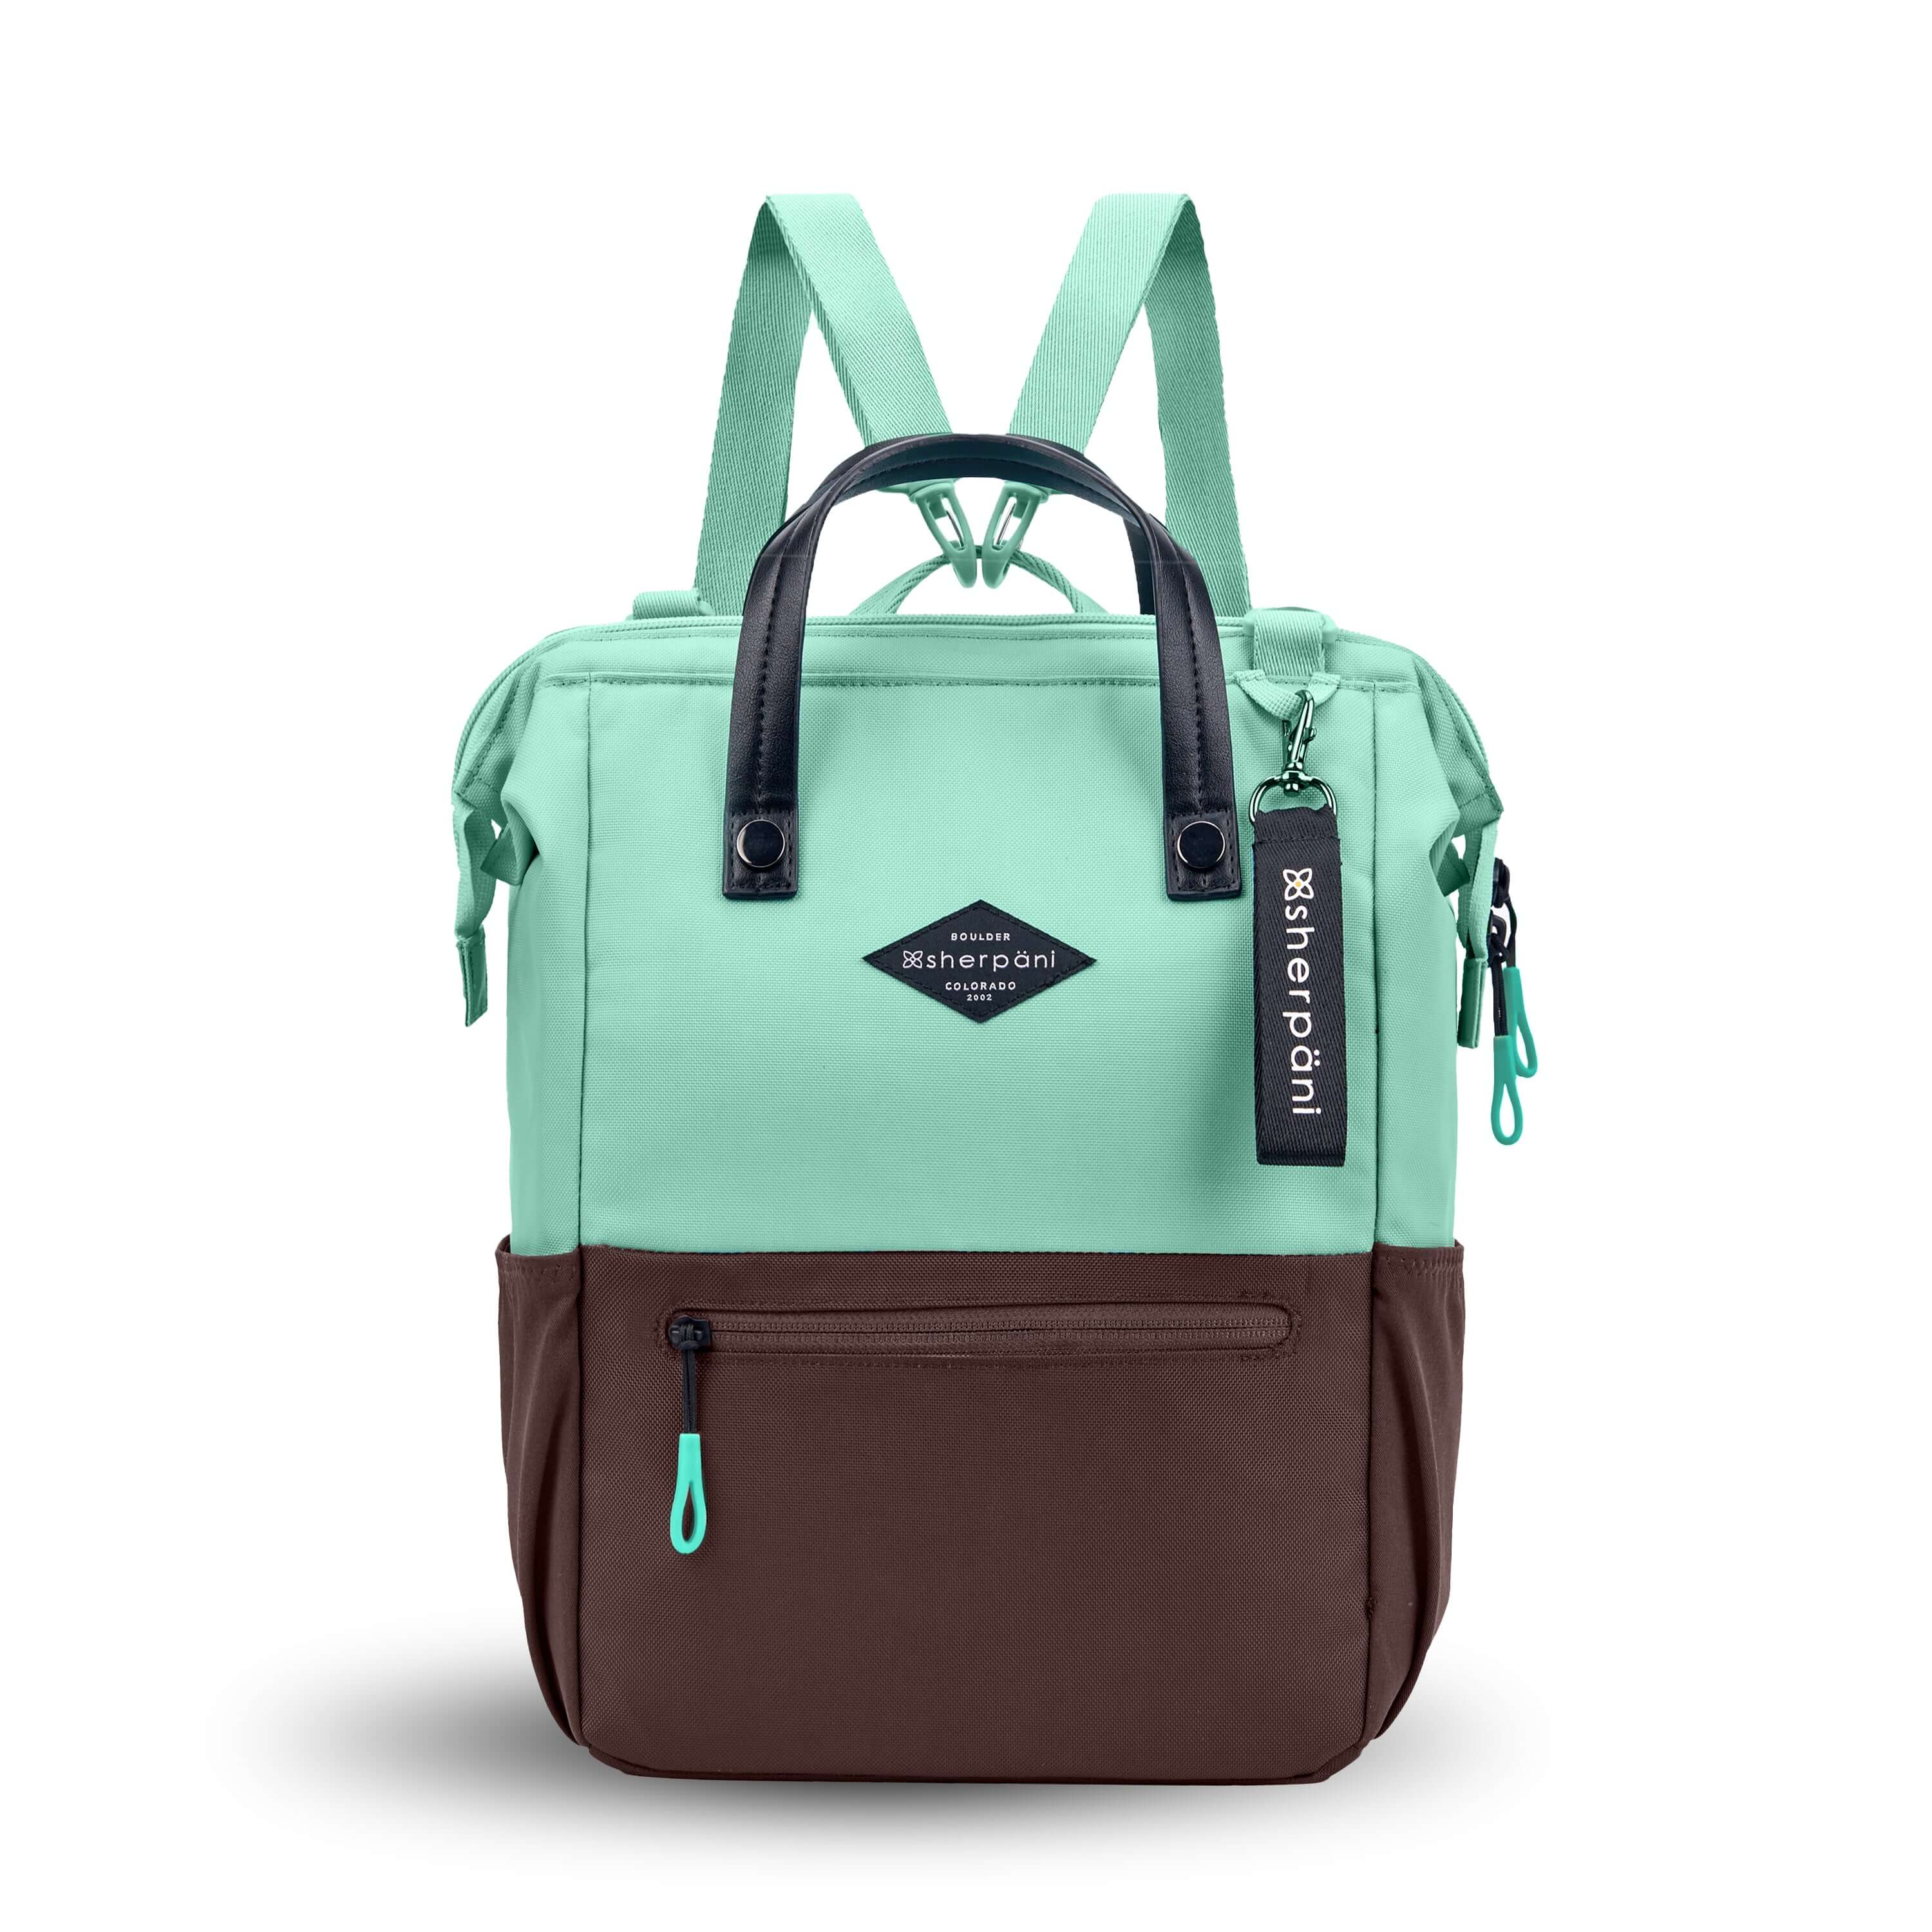 Flat front view of Sherpani three-in-one bag, the Dispatch in Seagreen. The bag is two-toned: the top is light green and the bottom is brown. There is an external zipper pocket on the front panel. Easy-pull zippers are accented in light green. A branded Sherpani keychain is clipped to the upper right corner. Elastic water bottle holders sit on either side of the bag. It has short tote handles and adjustable/detachable straps that can function for a backpack or crossbody. 